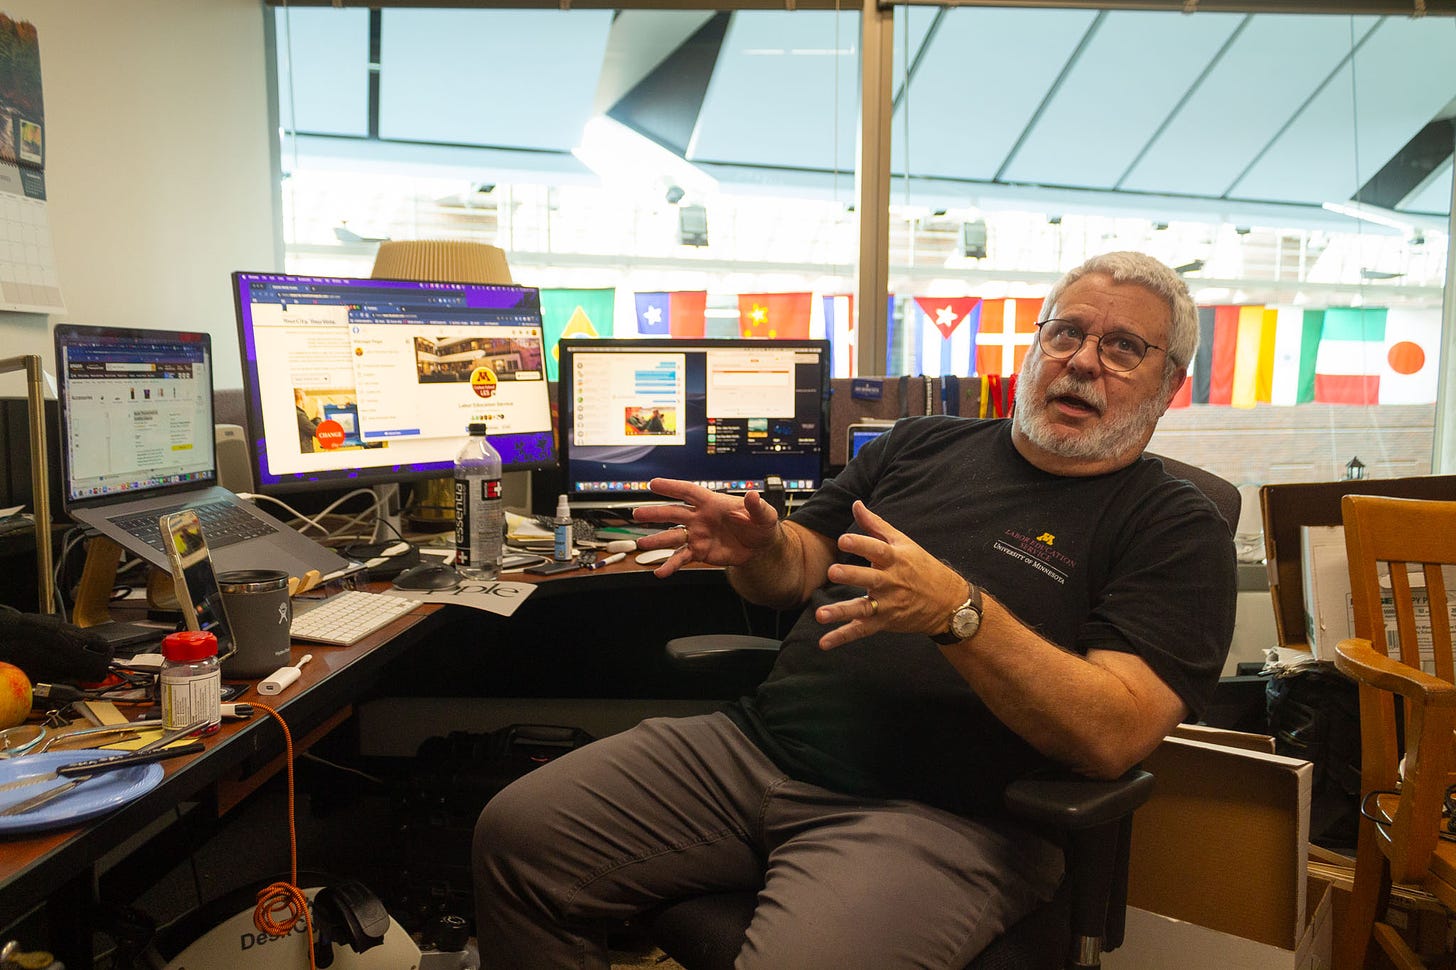 a white man with white hair and scruff wearing glasses and a black tee shirt sits at a desk with three monitors with his hands gesturing to the left of the image